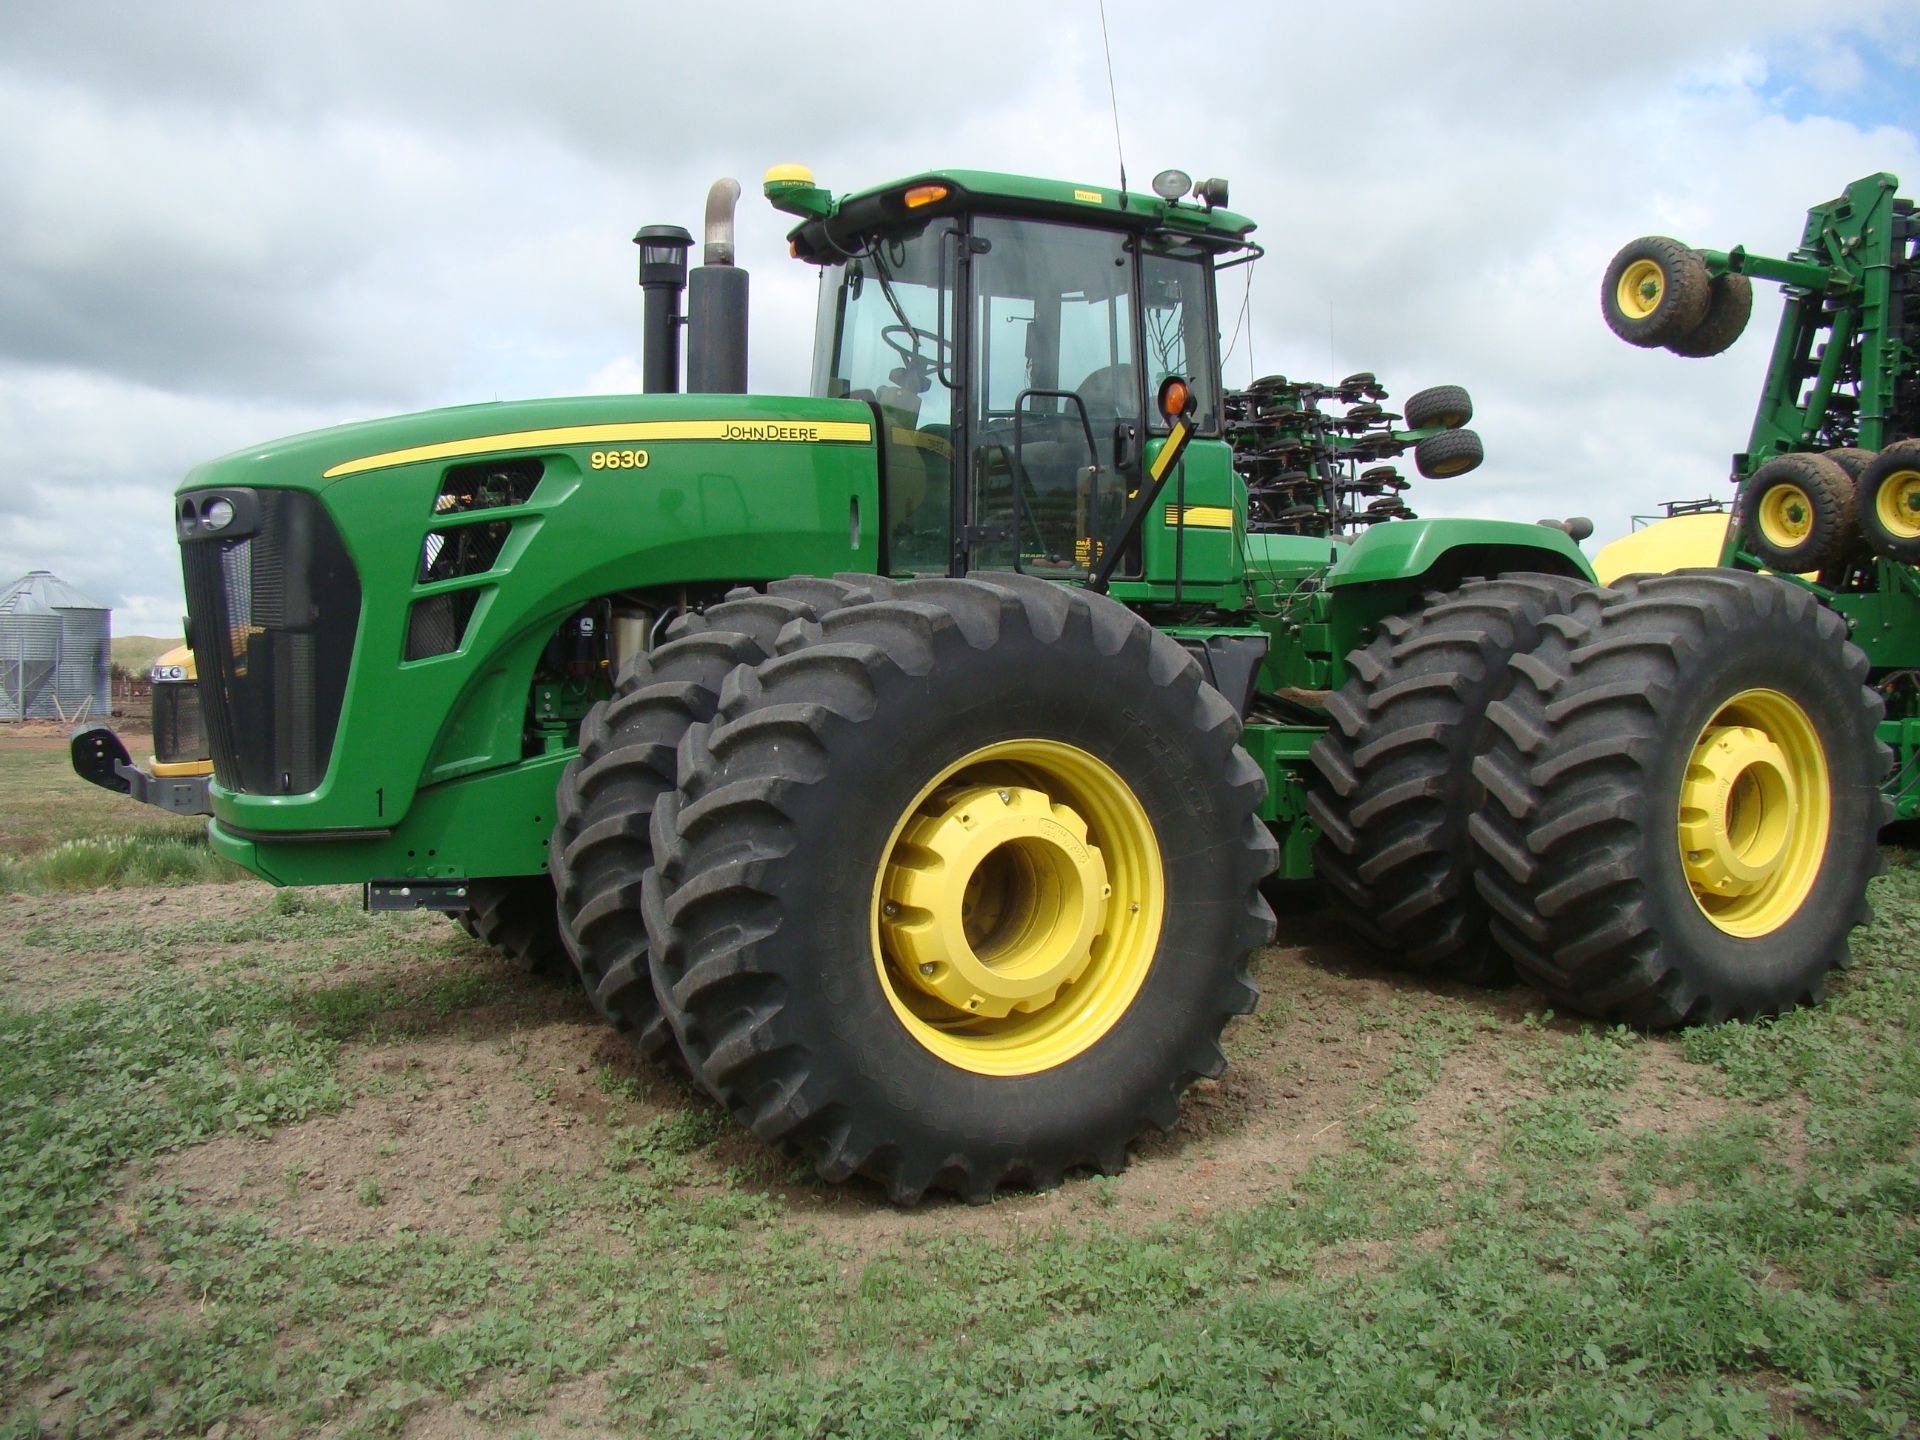 2008 John Deere 9630 FWD Tractor SN: RW9630P002176, 6 Hydraulics, 2875 Hours, Weight package